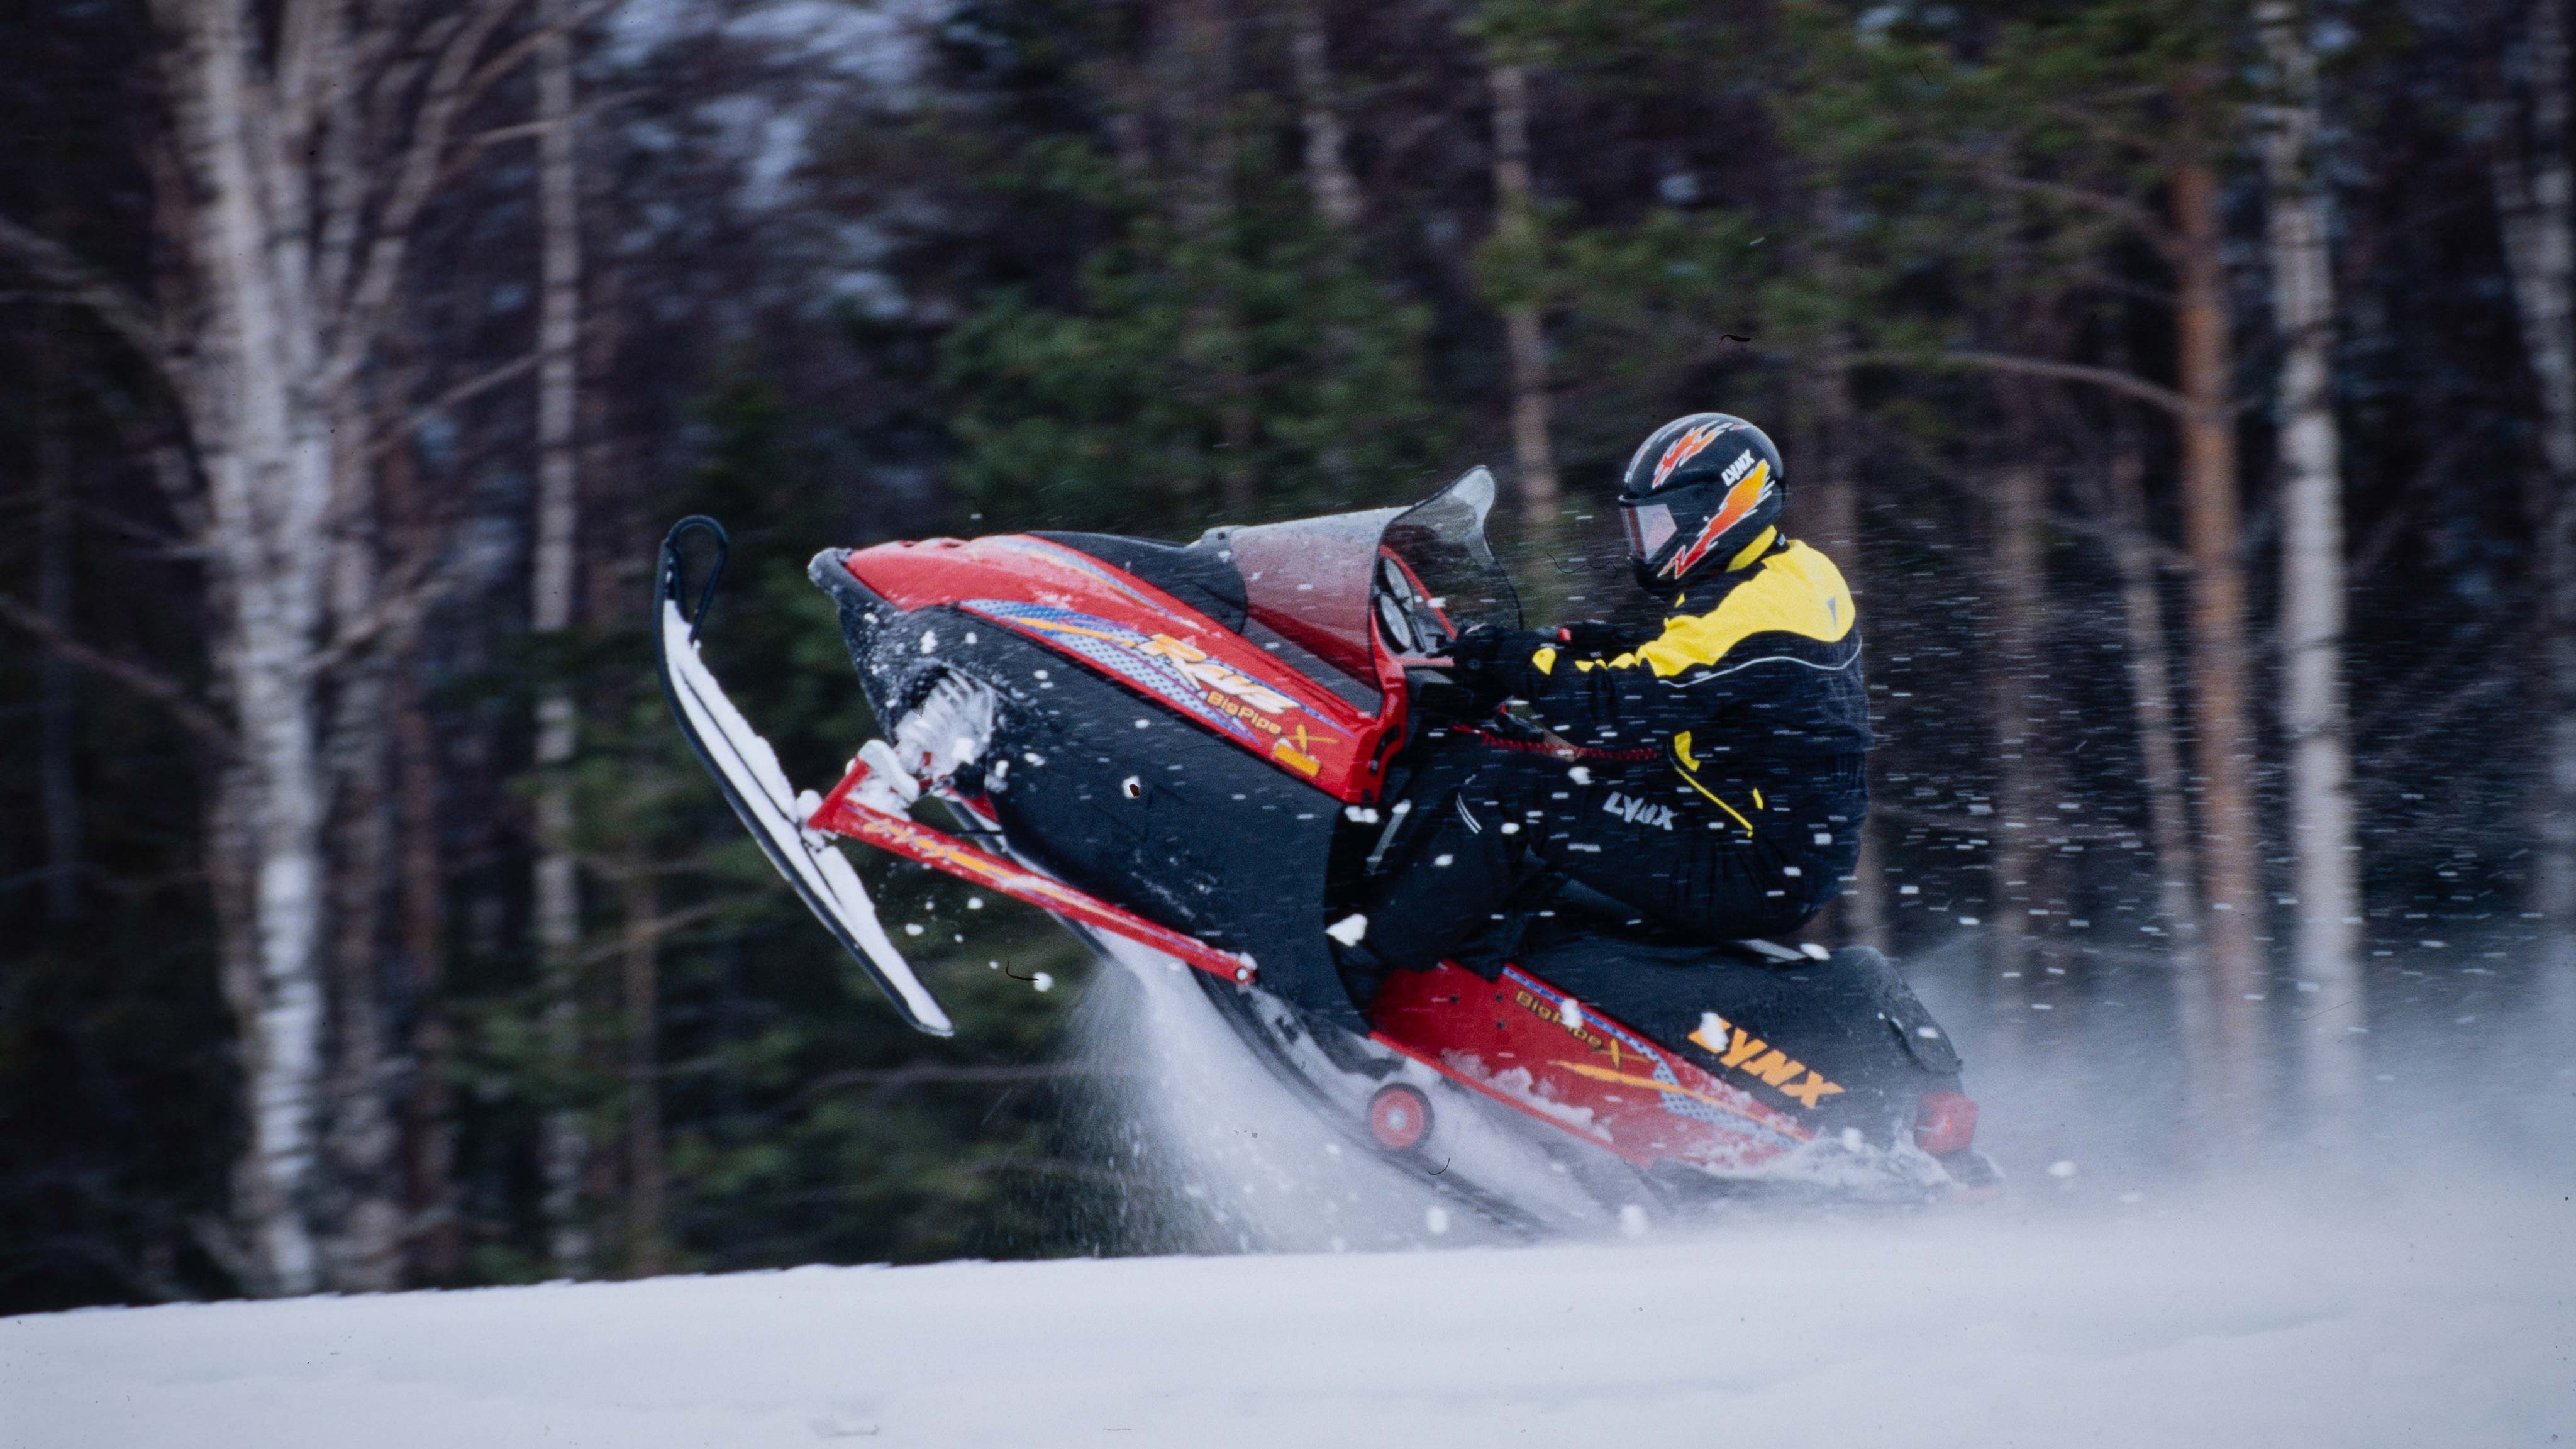 Man accelerating with Lynx Rave Big Pipe X 1999 snowmobile